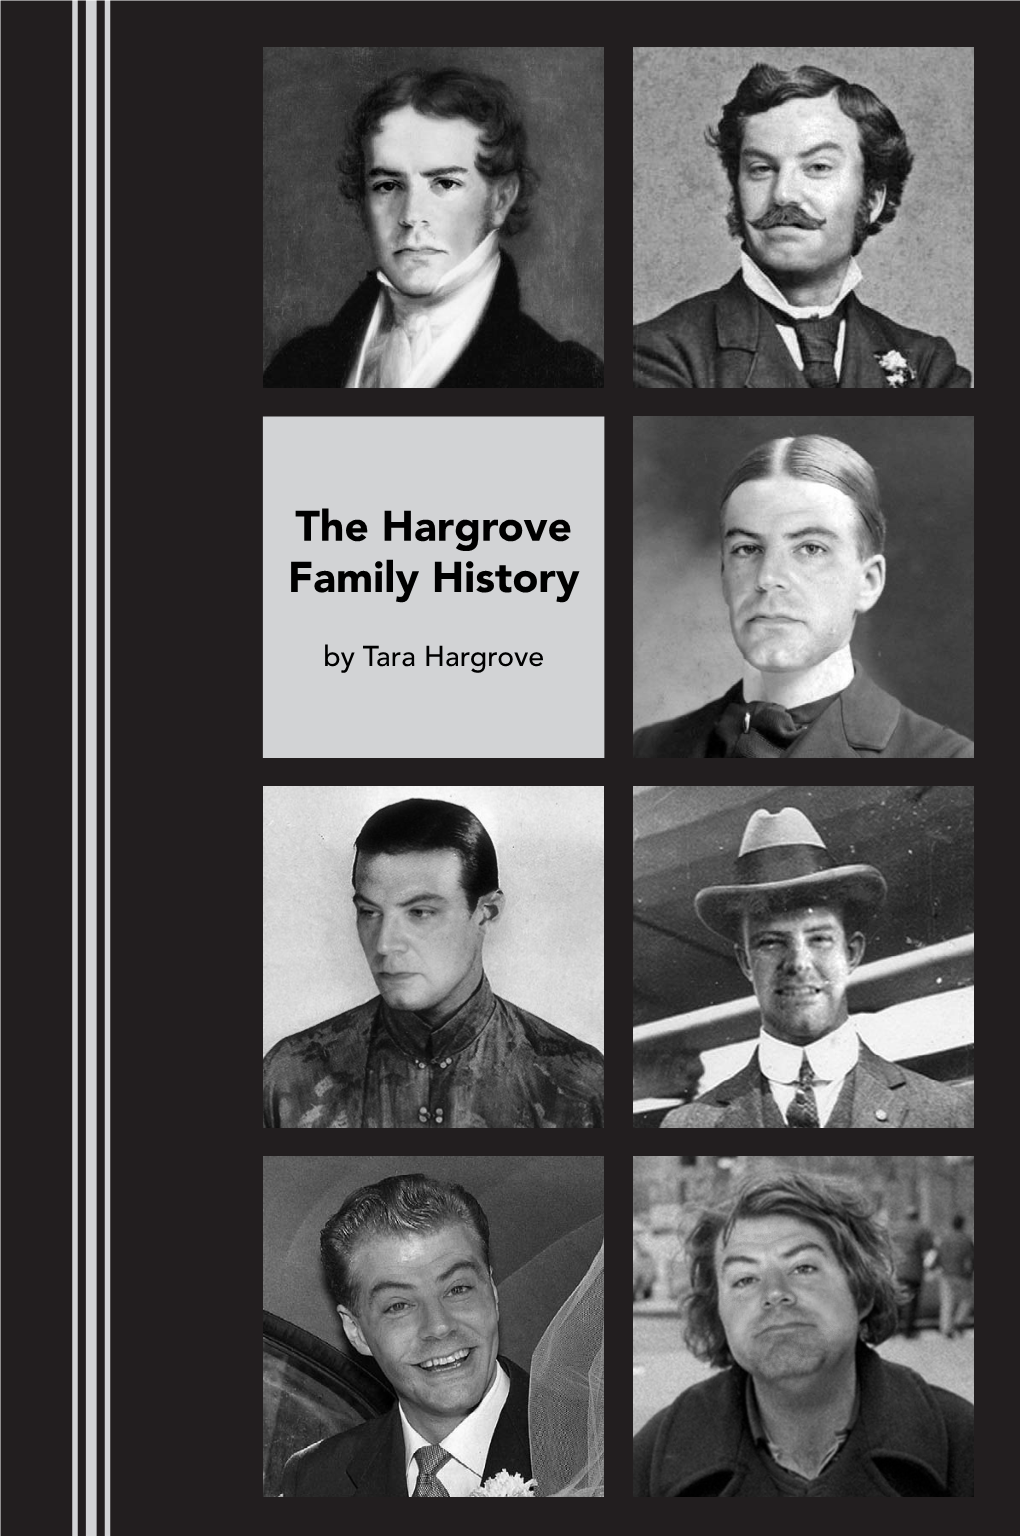 The Hargrove Family History” Exhibit at the Nelson-Atkins Museum of Art, December 2012 - March 2013